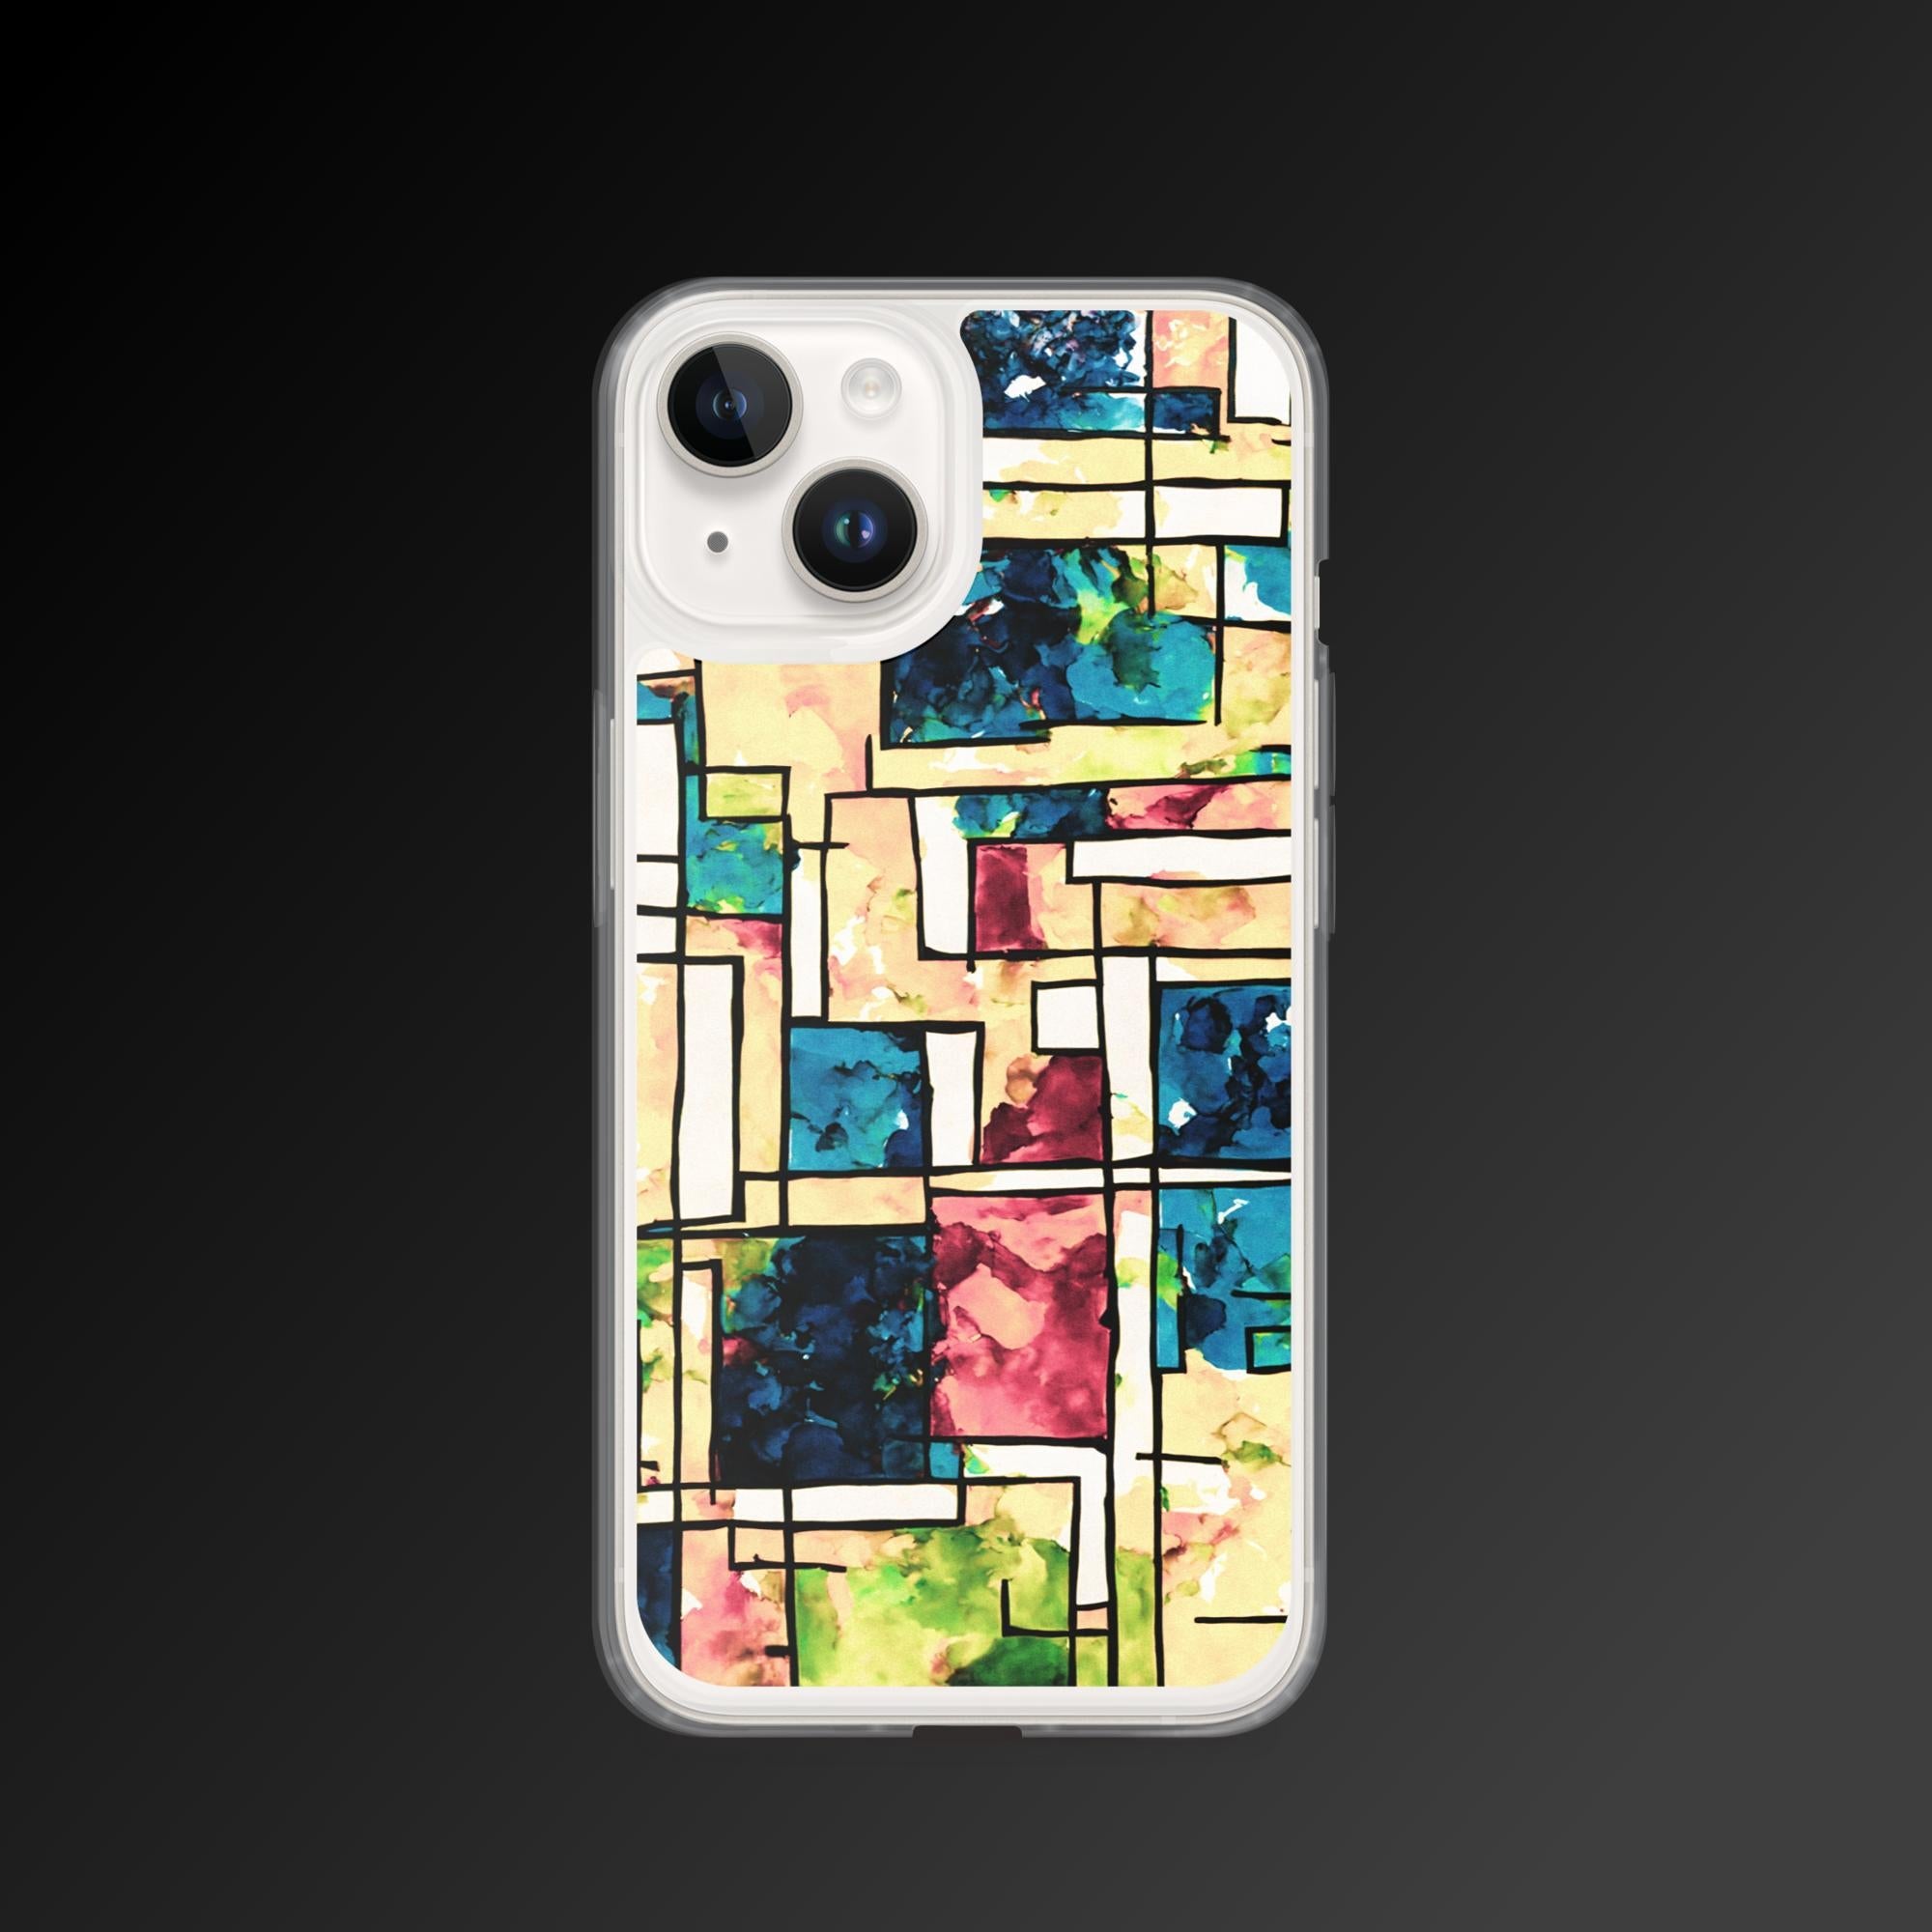 "Warm yet cold" clear iphone case - Clear iphone case - Ever colorful